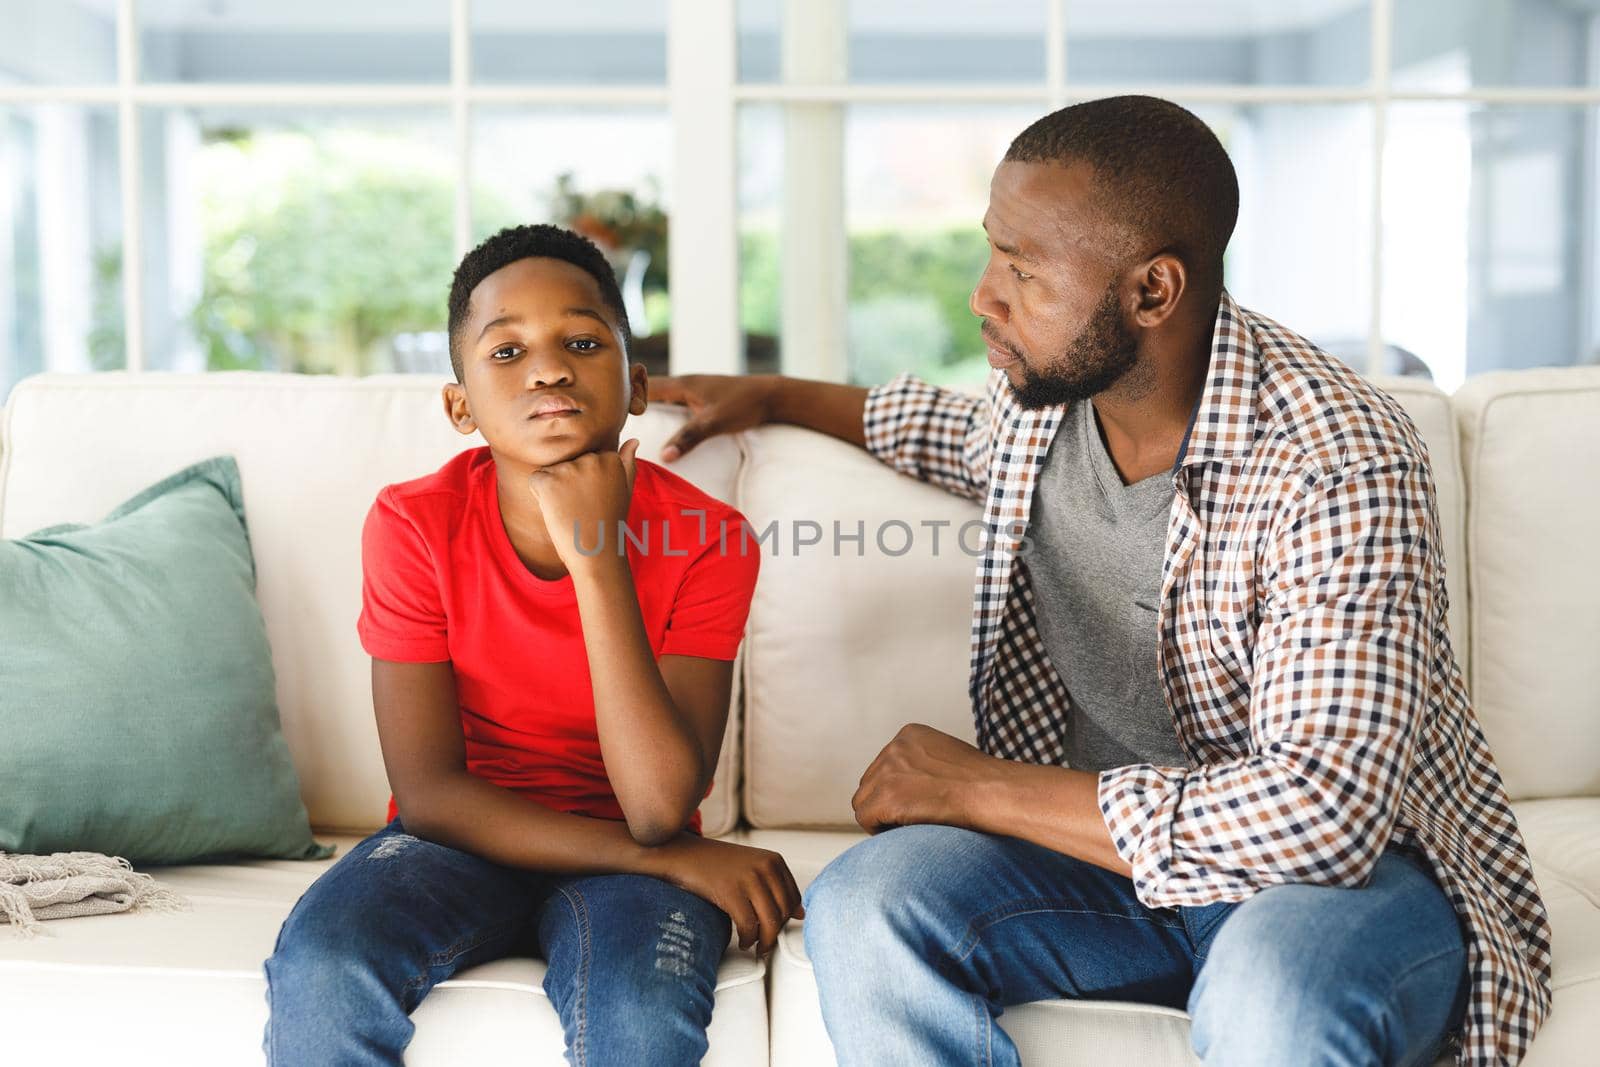 African american father sitting on couch talking to son in living room. family spending time at home, father son relationship.